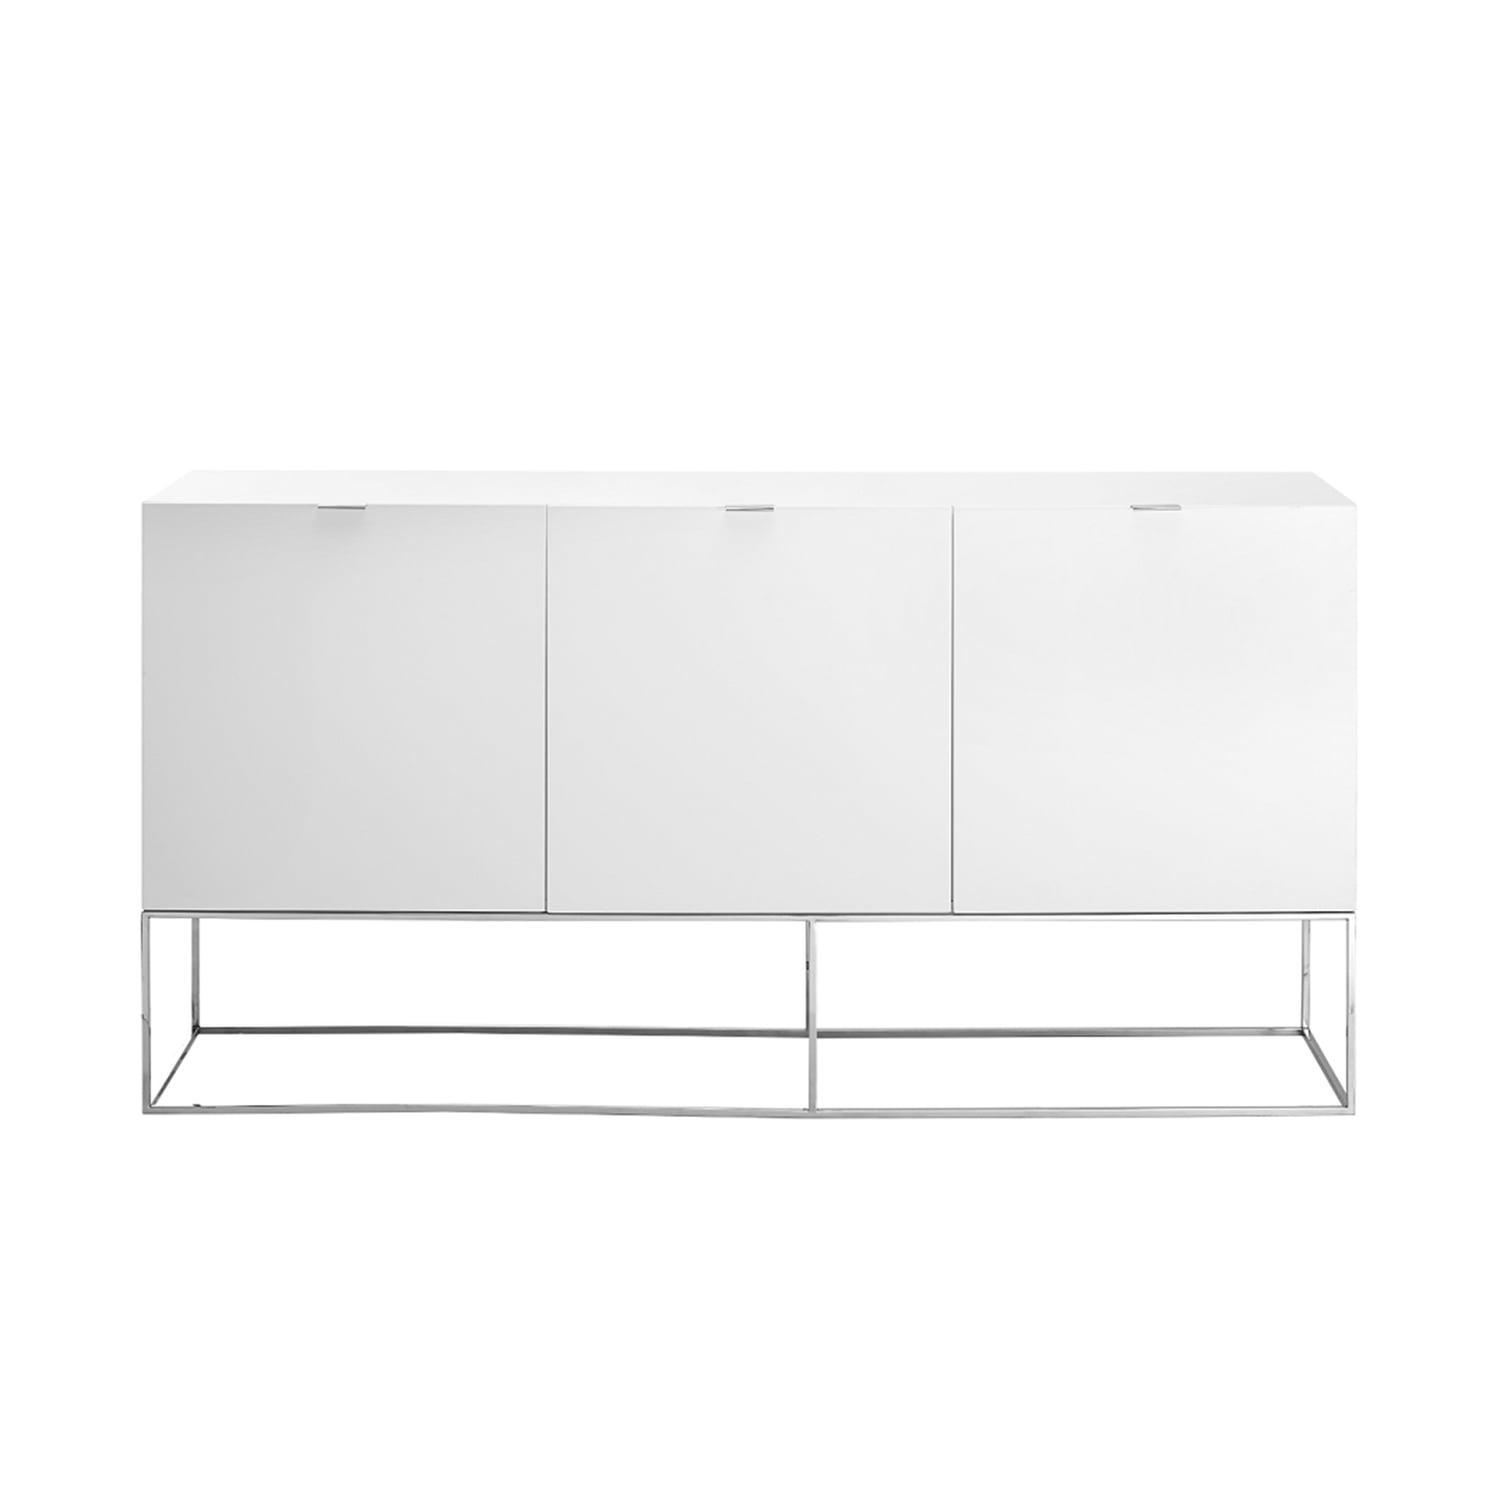 Vizzione High Gloss White 71" Modern Buffet-Server with Stainless Steel Accents